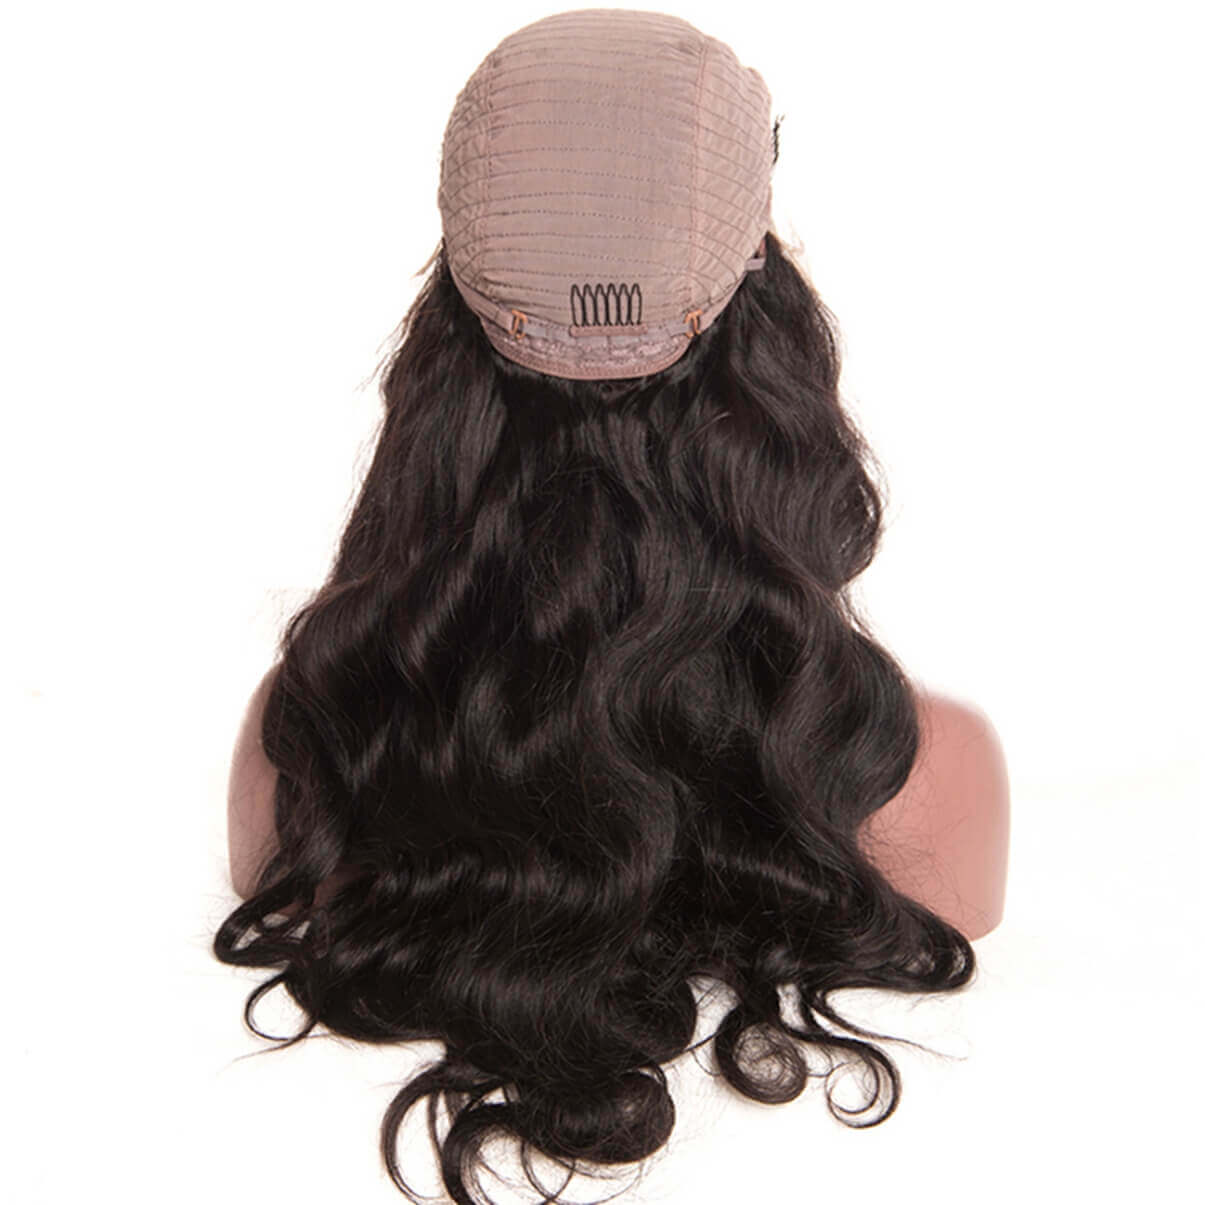 Lakihair Loose Wave Lace Front Wigs 180% Full Density 100% Virgin Human Hair Wigs With Baby Hair